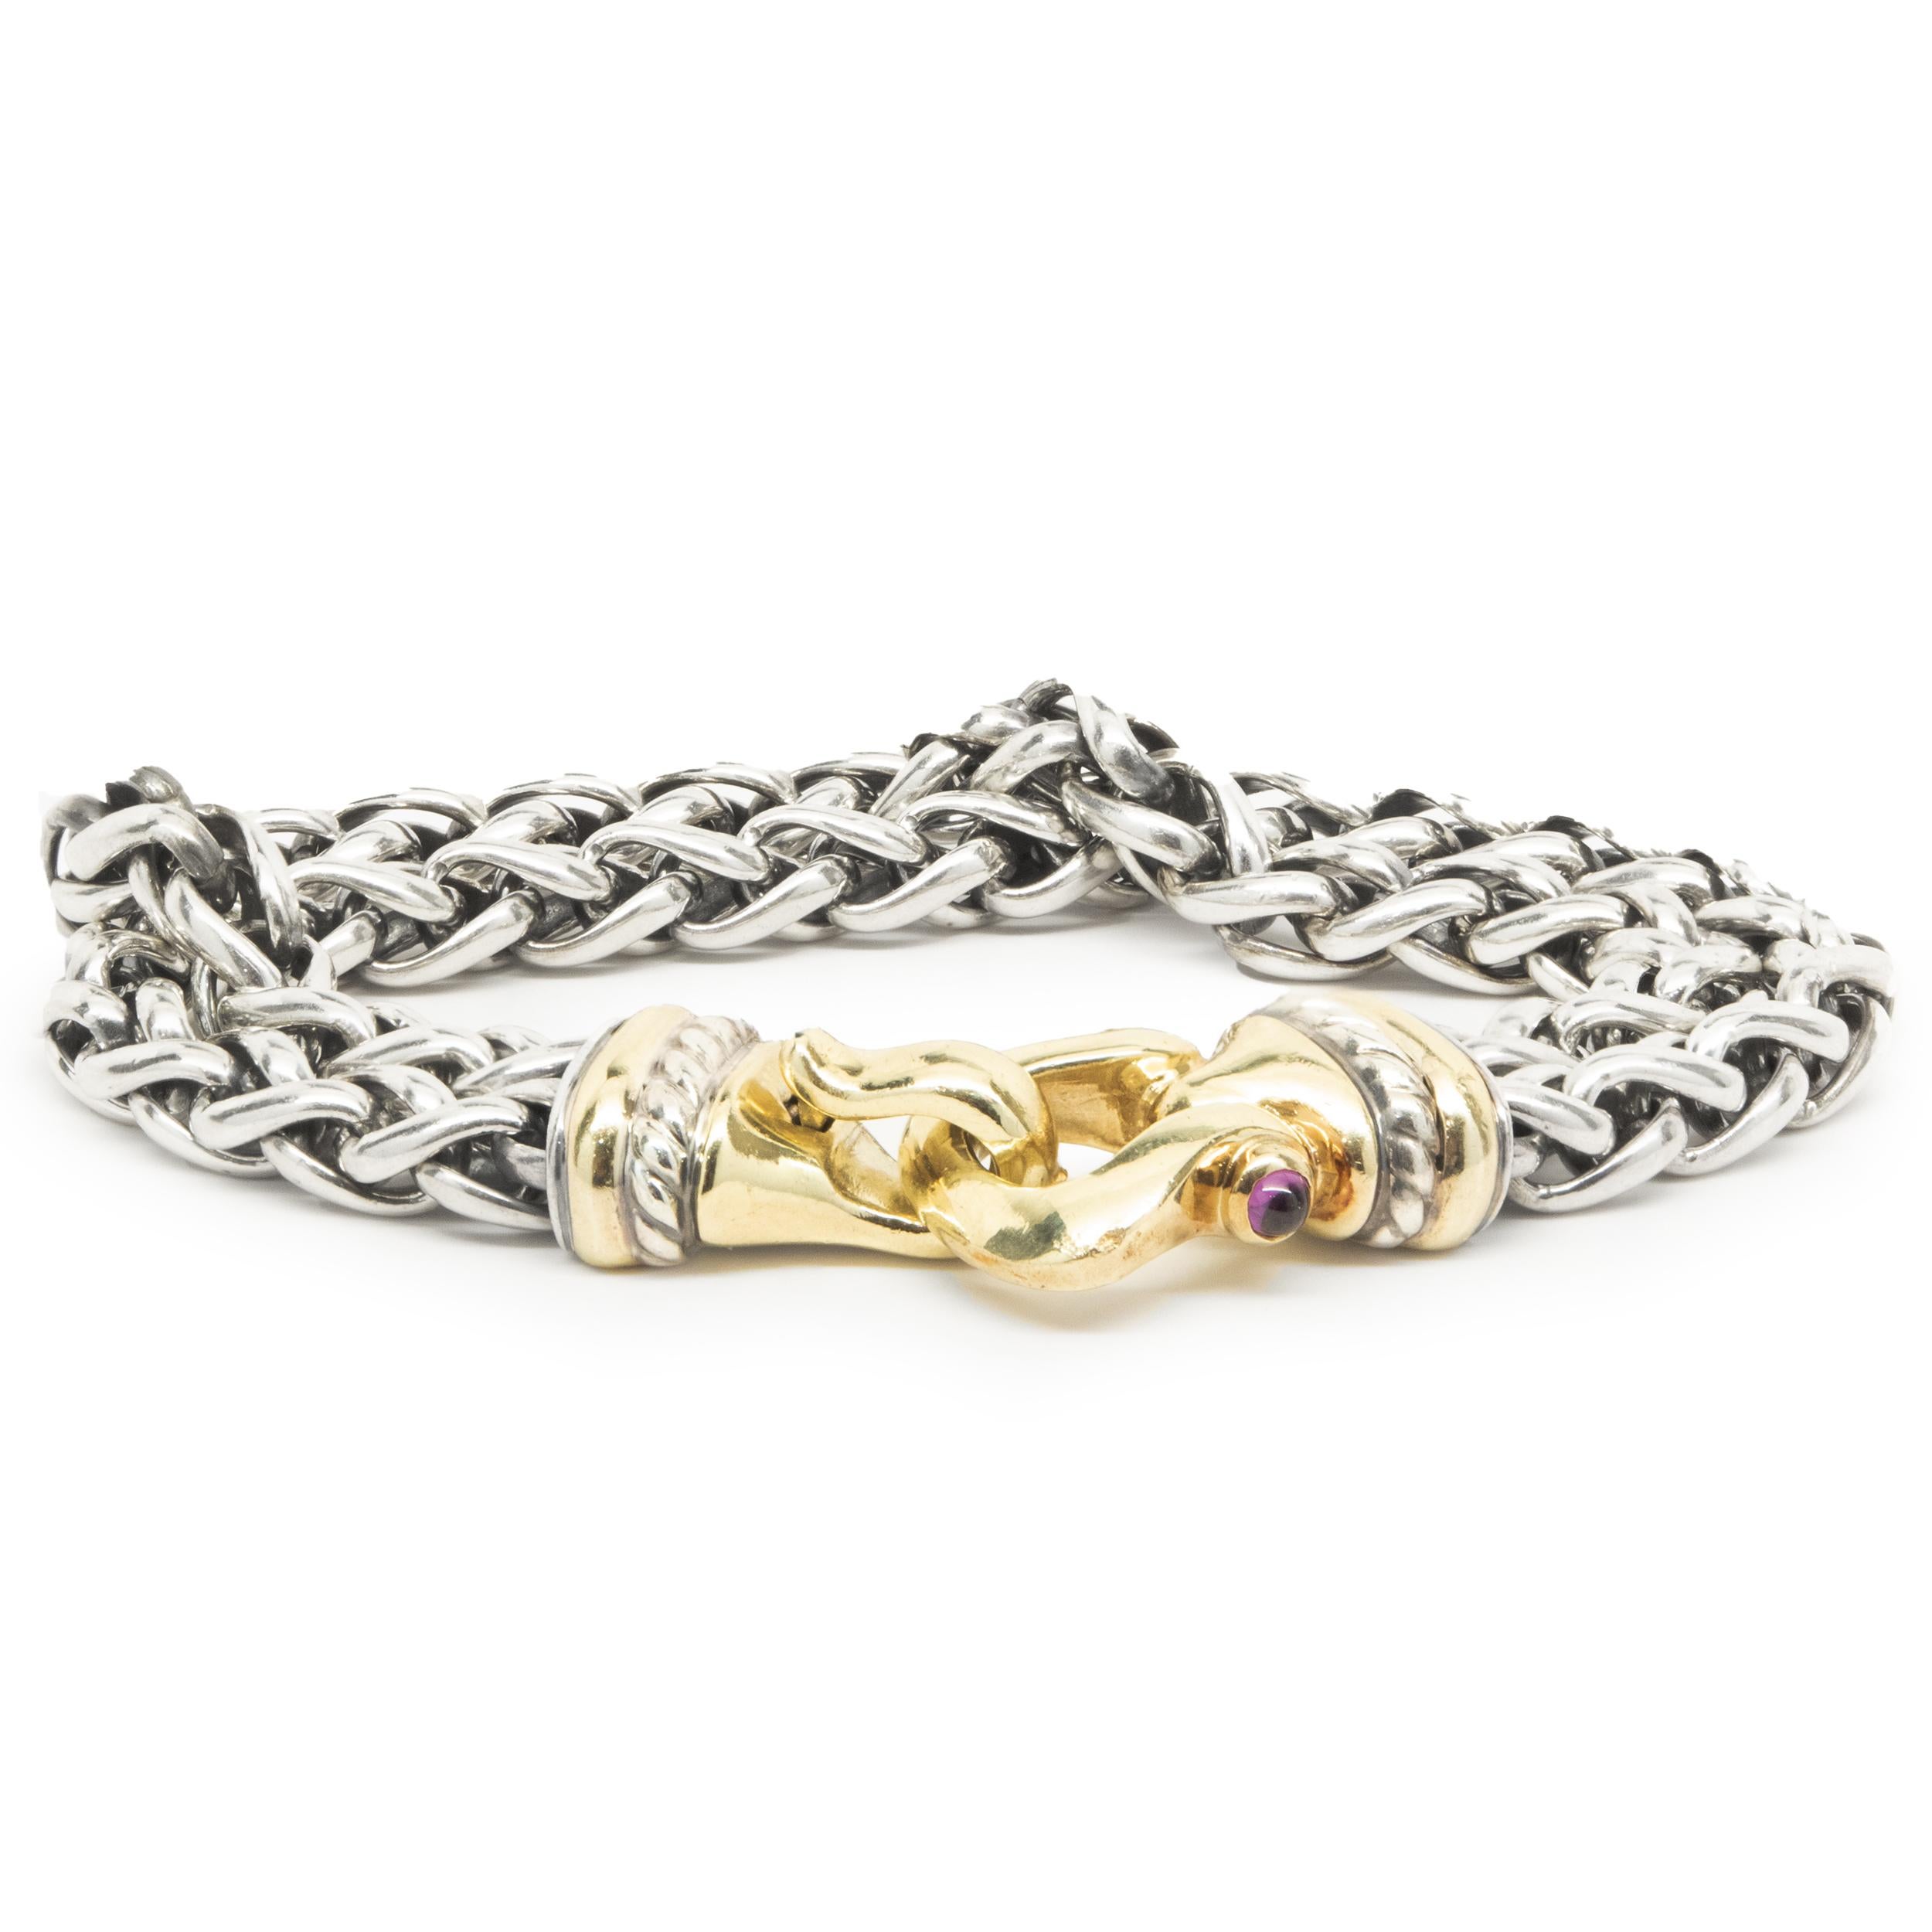 Designer: David Yurman
Material: sterling silver & 14K yellow gold
Dimensions: bracelet will fit up to a 7.5-inch wrist
Weight: 53.89 grams
